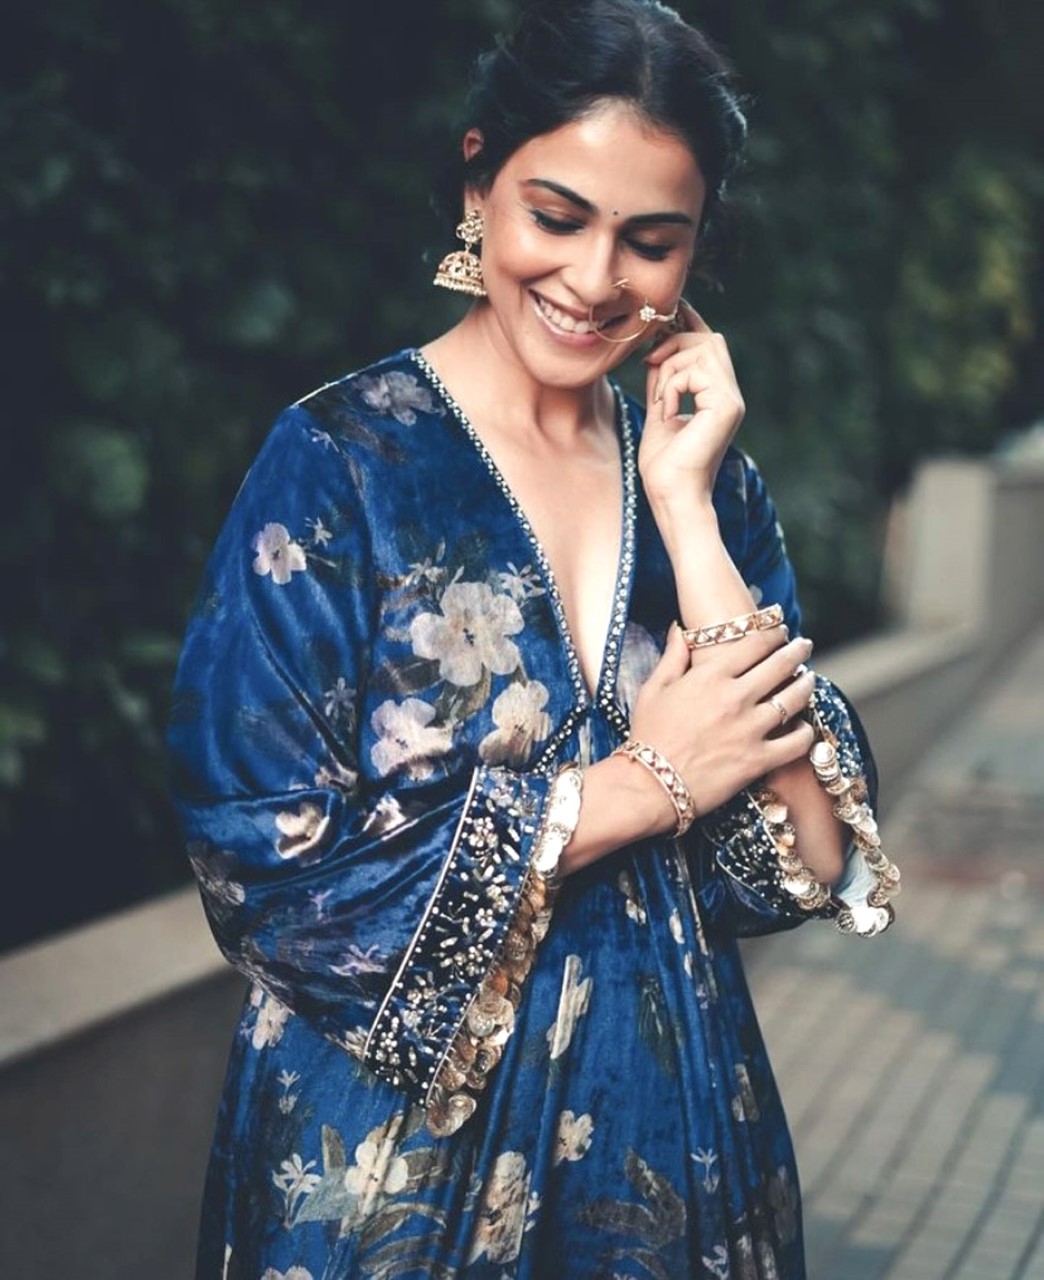 Genelia D’souza is a sight to behold in deep blue velvet kaftan set and nath